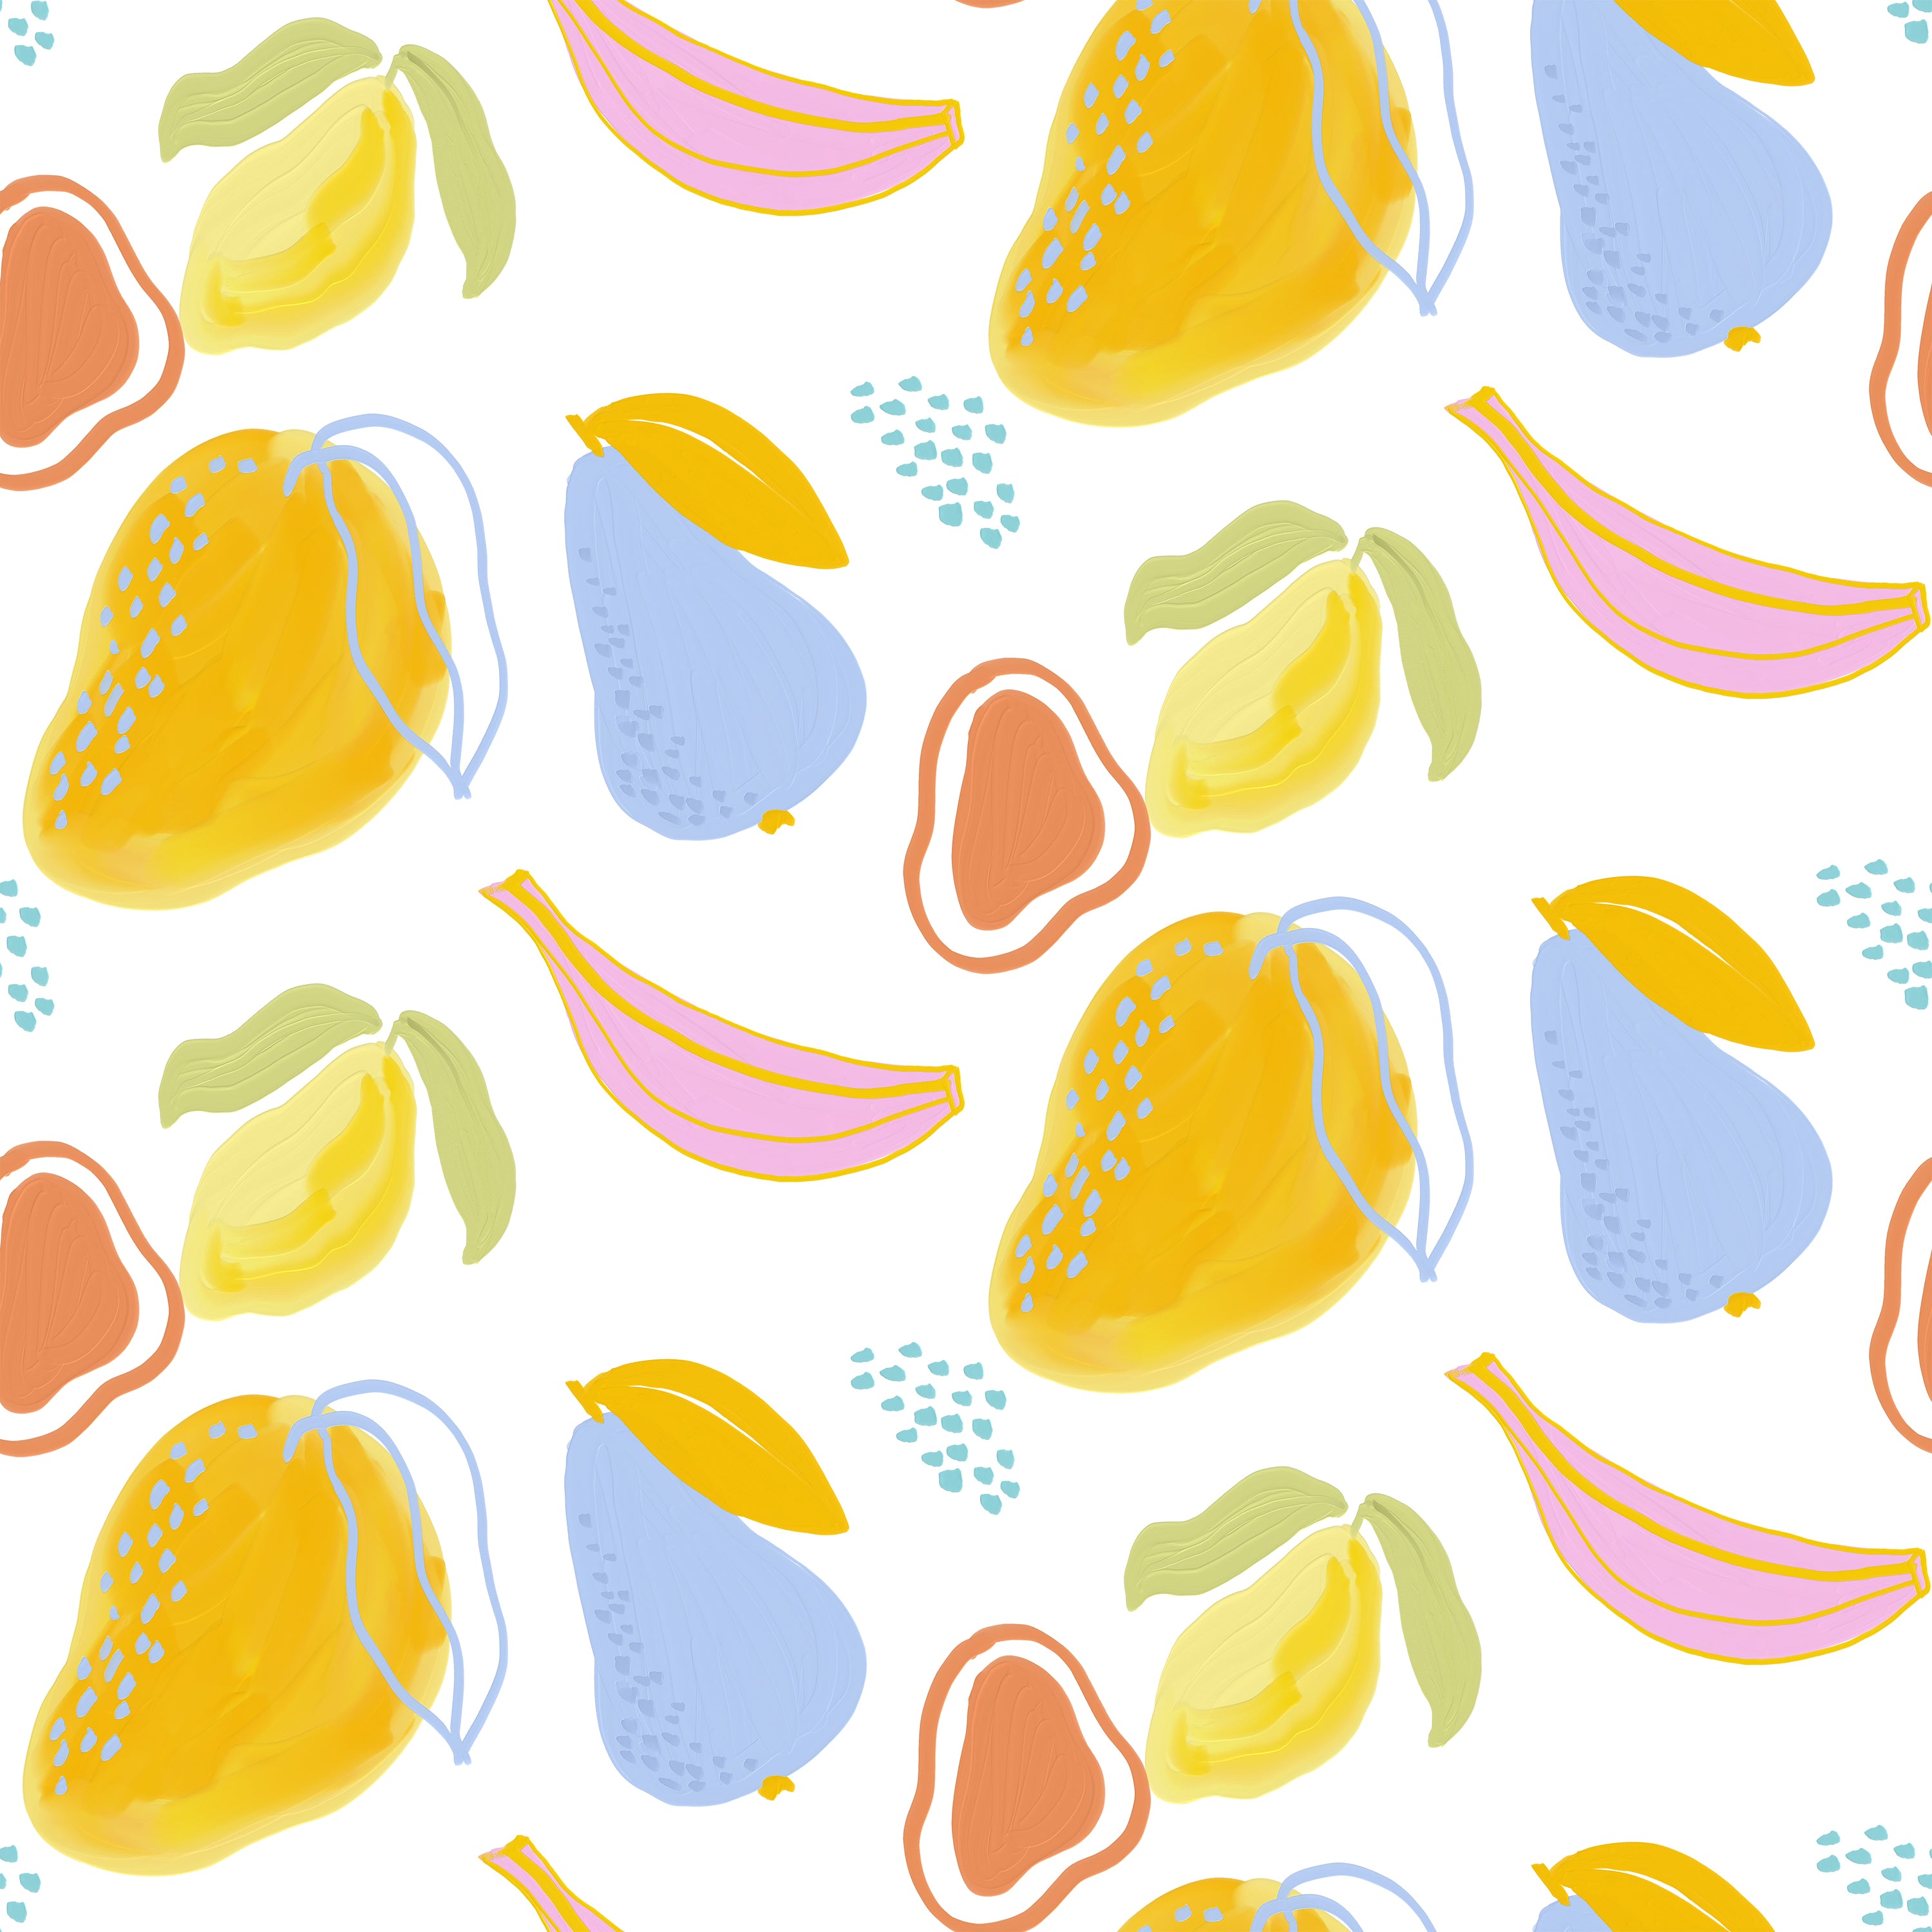 Close-up of Colourful Abstract Oil Fruit Wallpaper featuring pastel bananas, pears, and avocados.